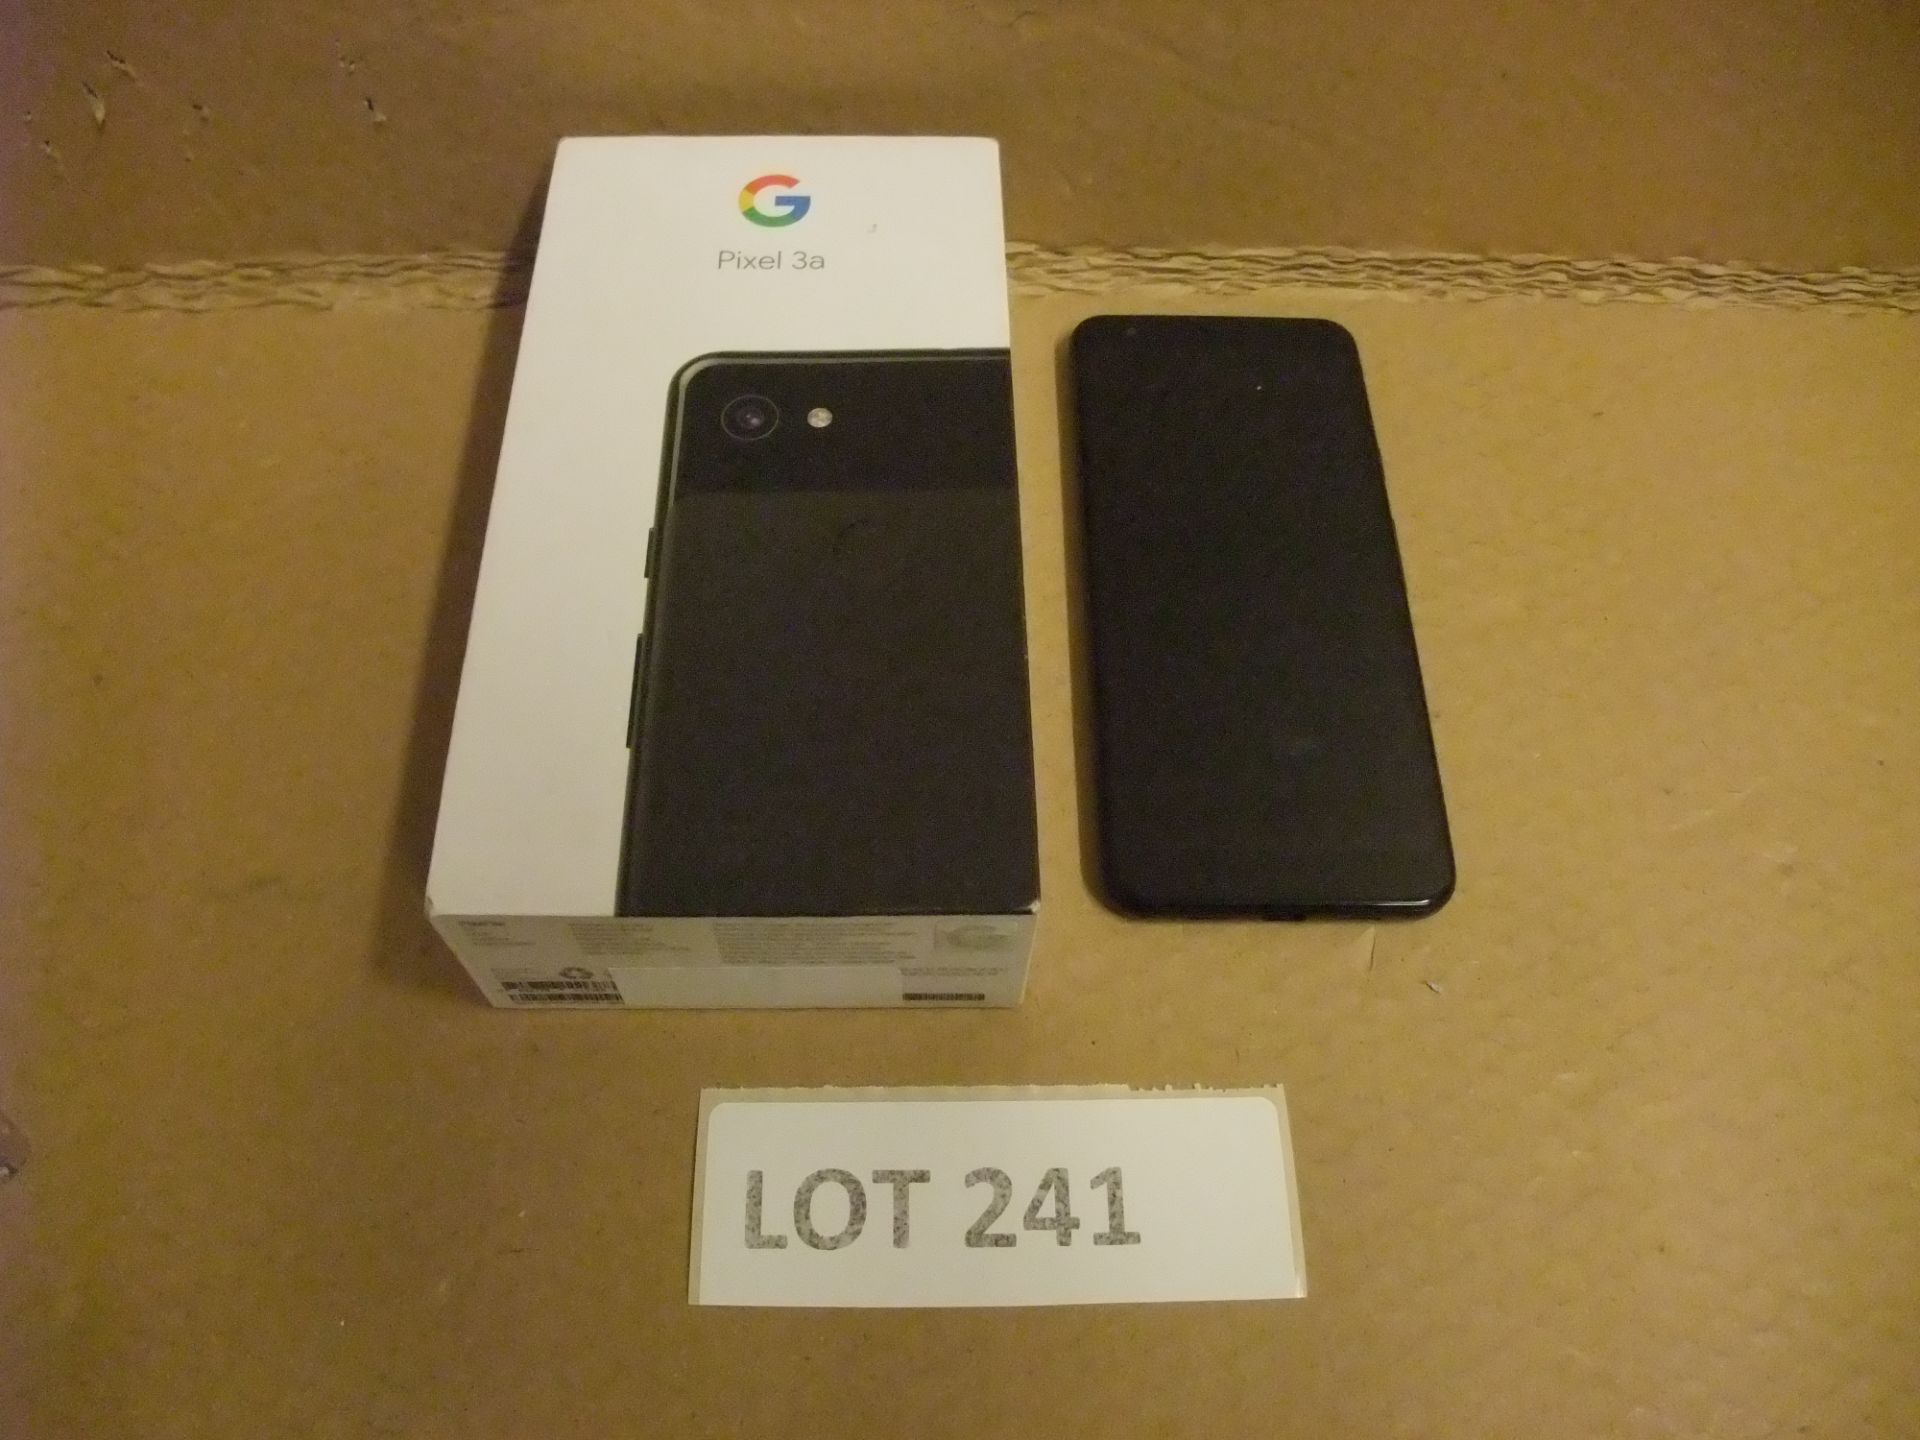 Google Pixel 3a (black) Android Phone - 64GbPlease read the following important notes:- All lots